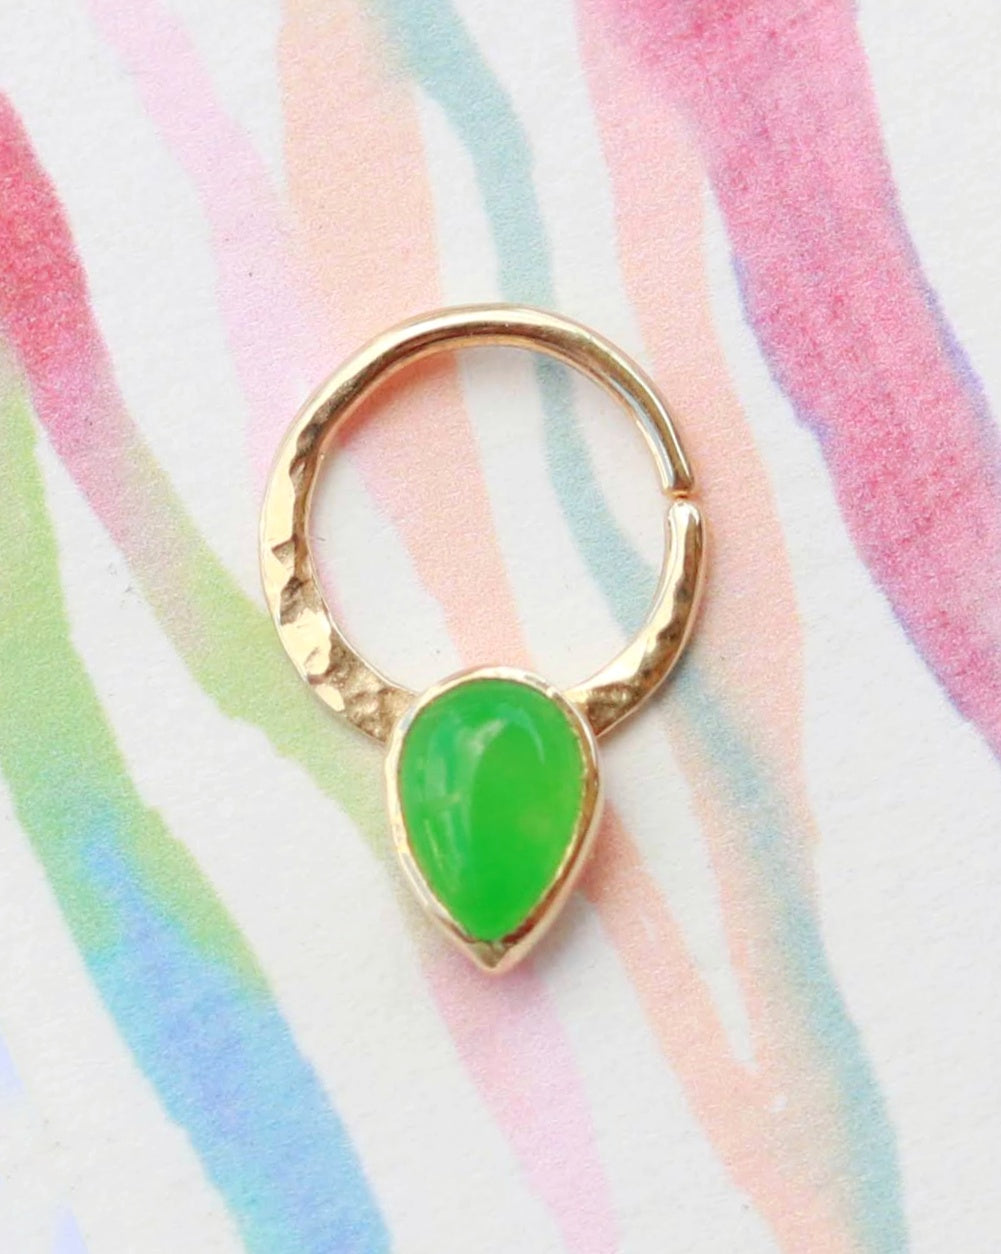 A 14k yellow gold septum hoop with a pear shaped jade gemstone that is bezel set, pointing downwards. The metal on the hoop has been textured and the entire piece is polished.